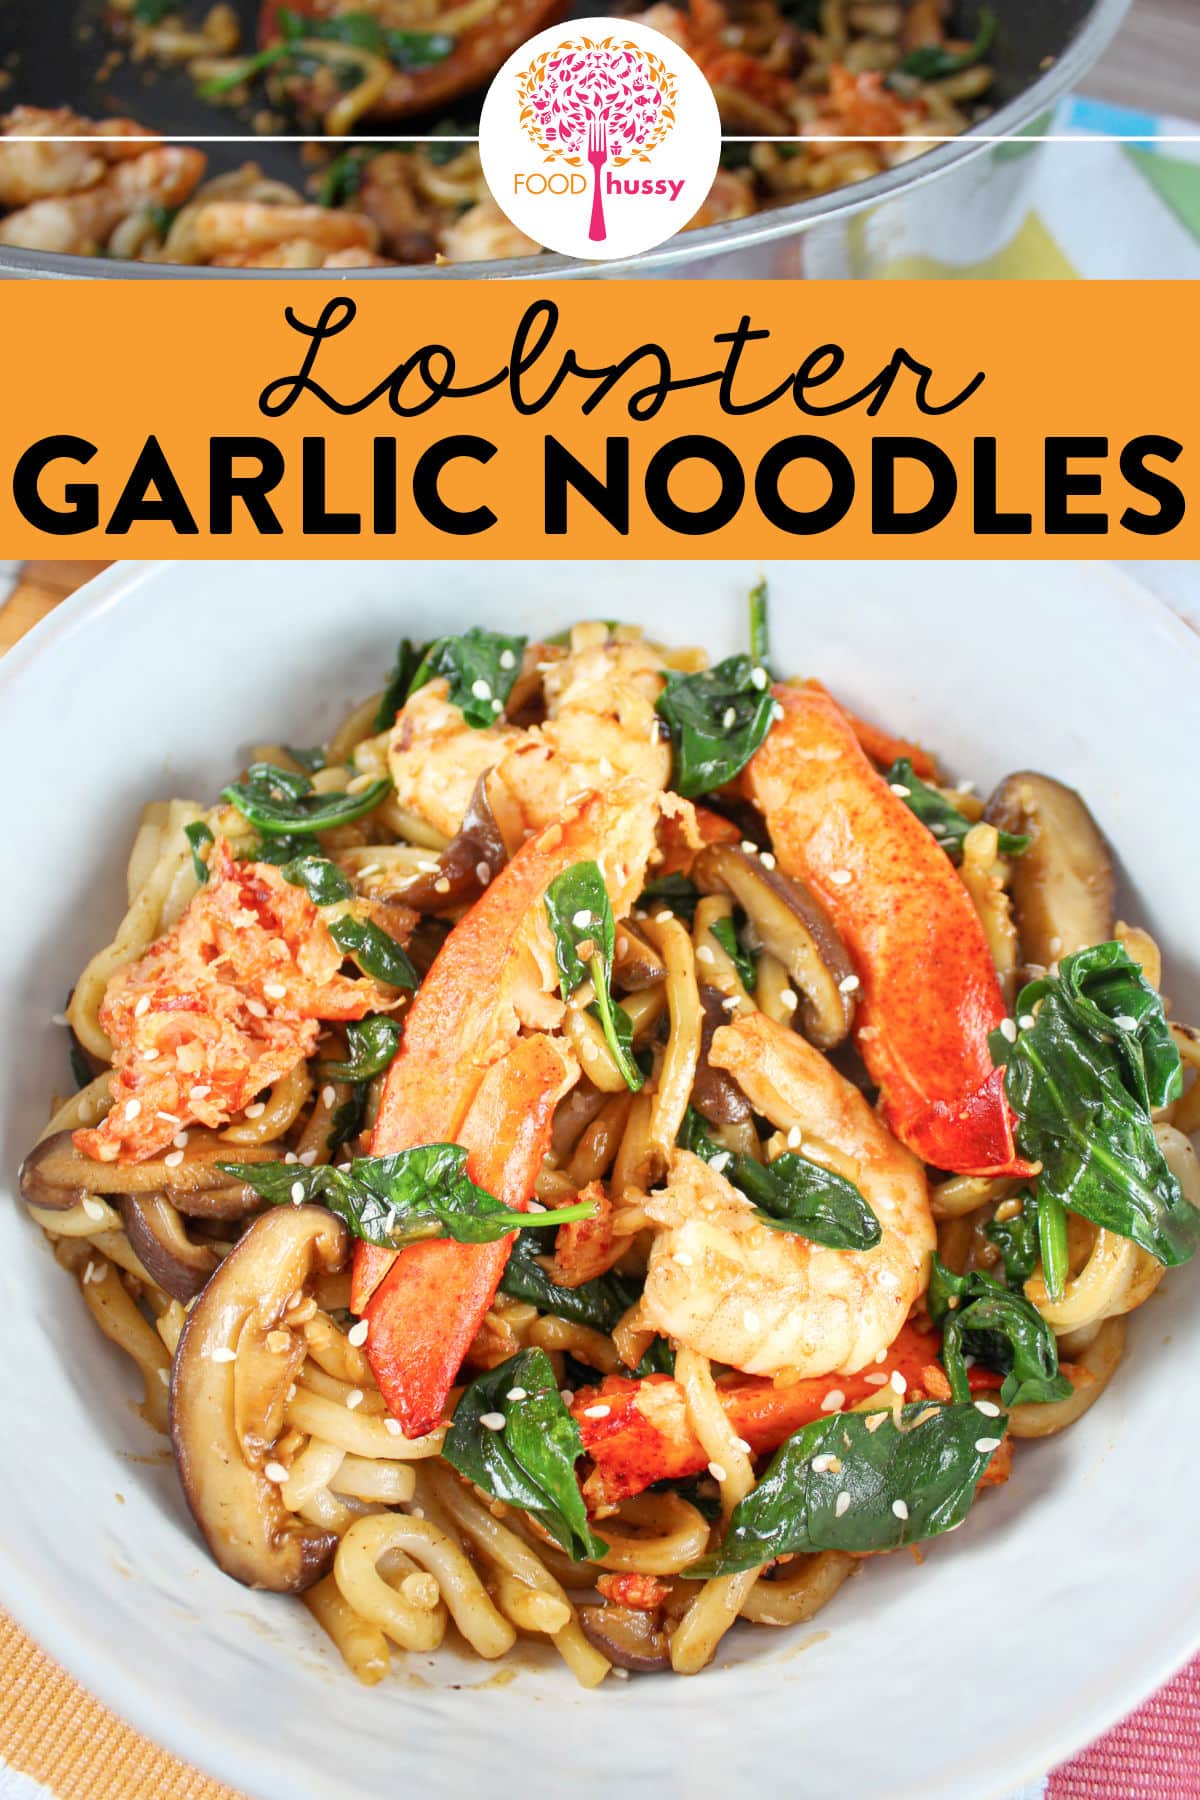 Yard House Garlic Lobster Noodles are a decadent and delicious dinner! Big chunks of lobster and seared shrimp tossed with shitake mushrooms, spinach and an easy stir fry sauce!  via @foodhussy